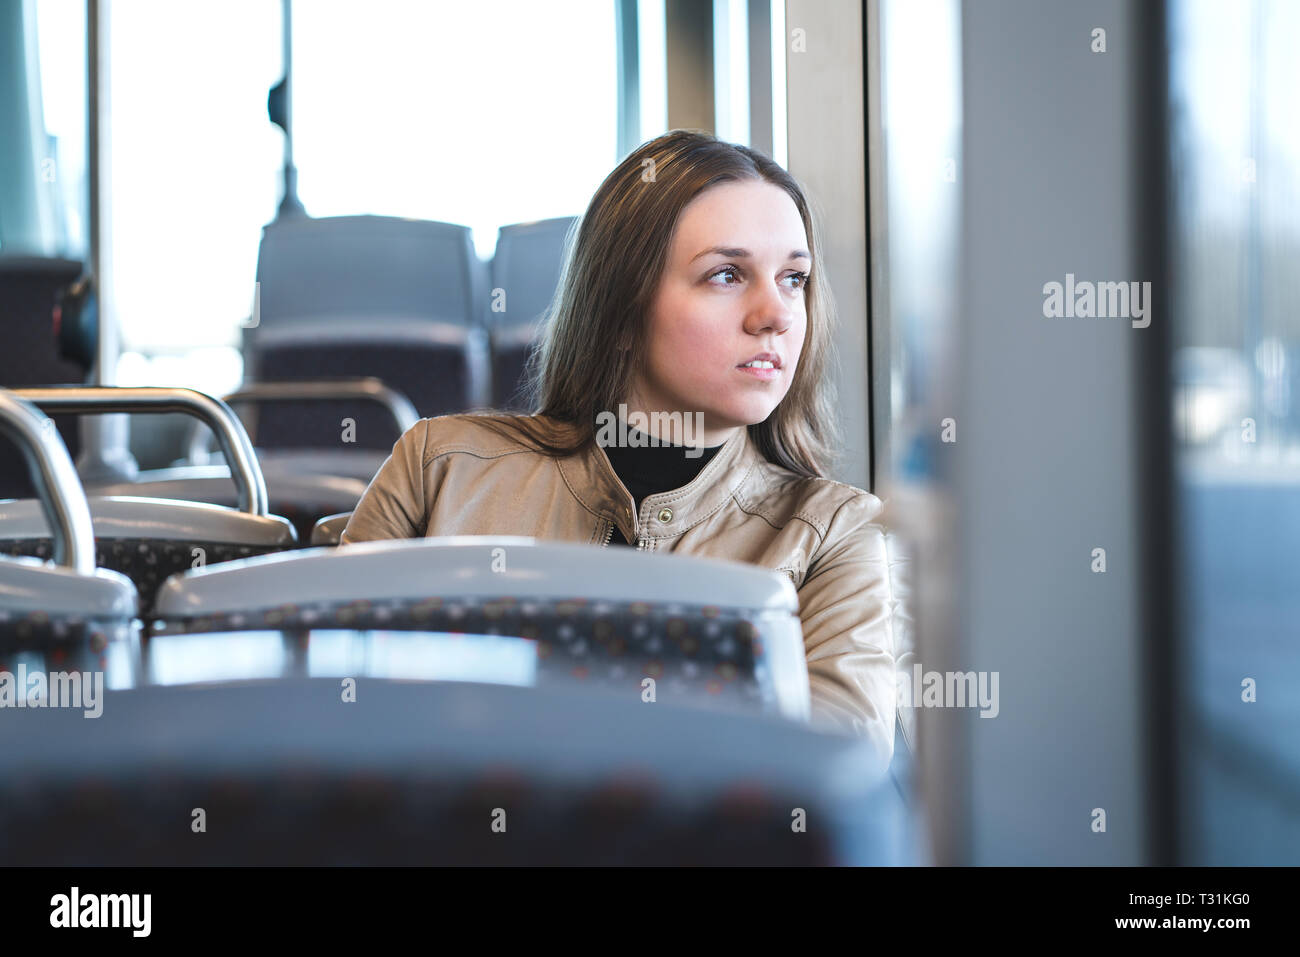 Serious woman in train or bus looking through the window. Thoughtful passenger in public transportation. Upset lady traveling. Stock Photo